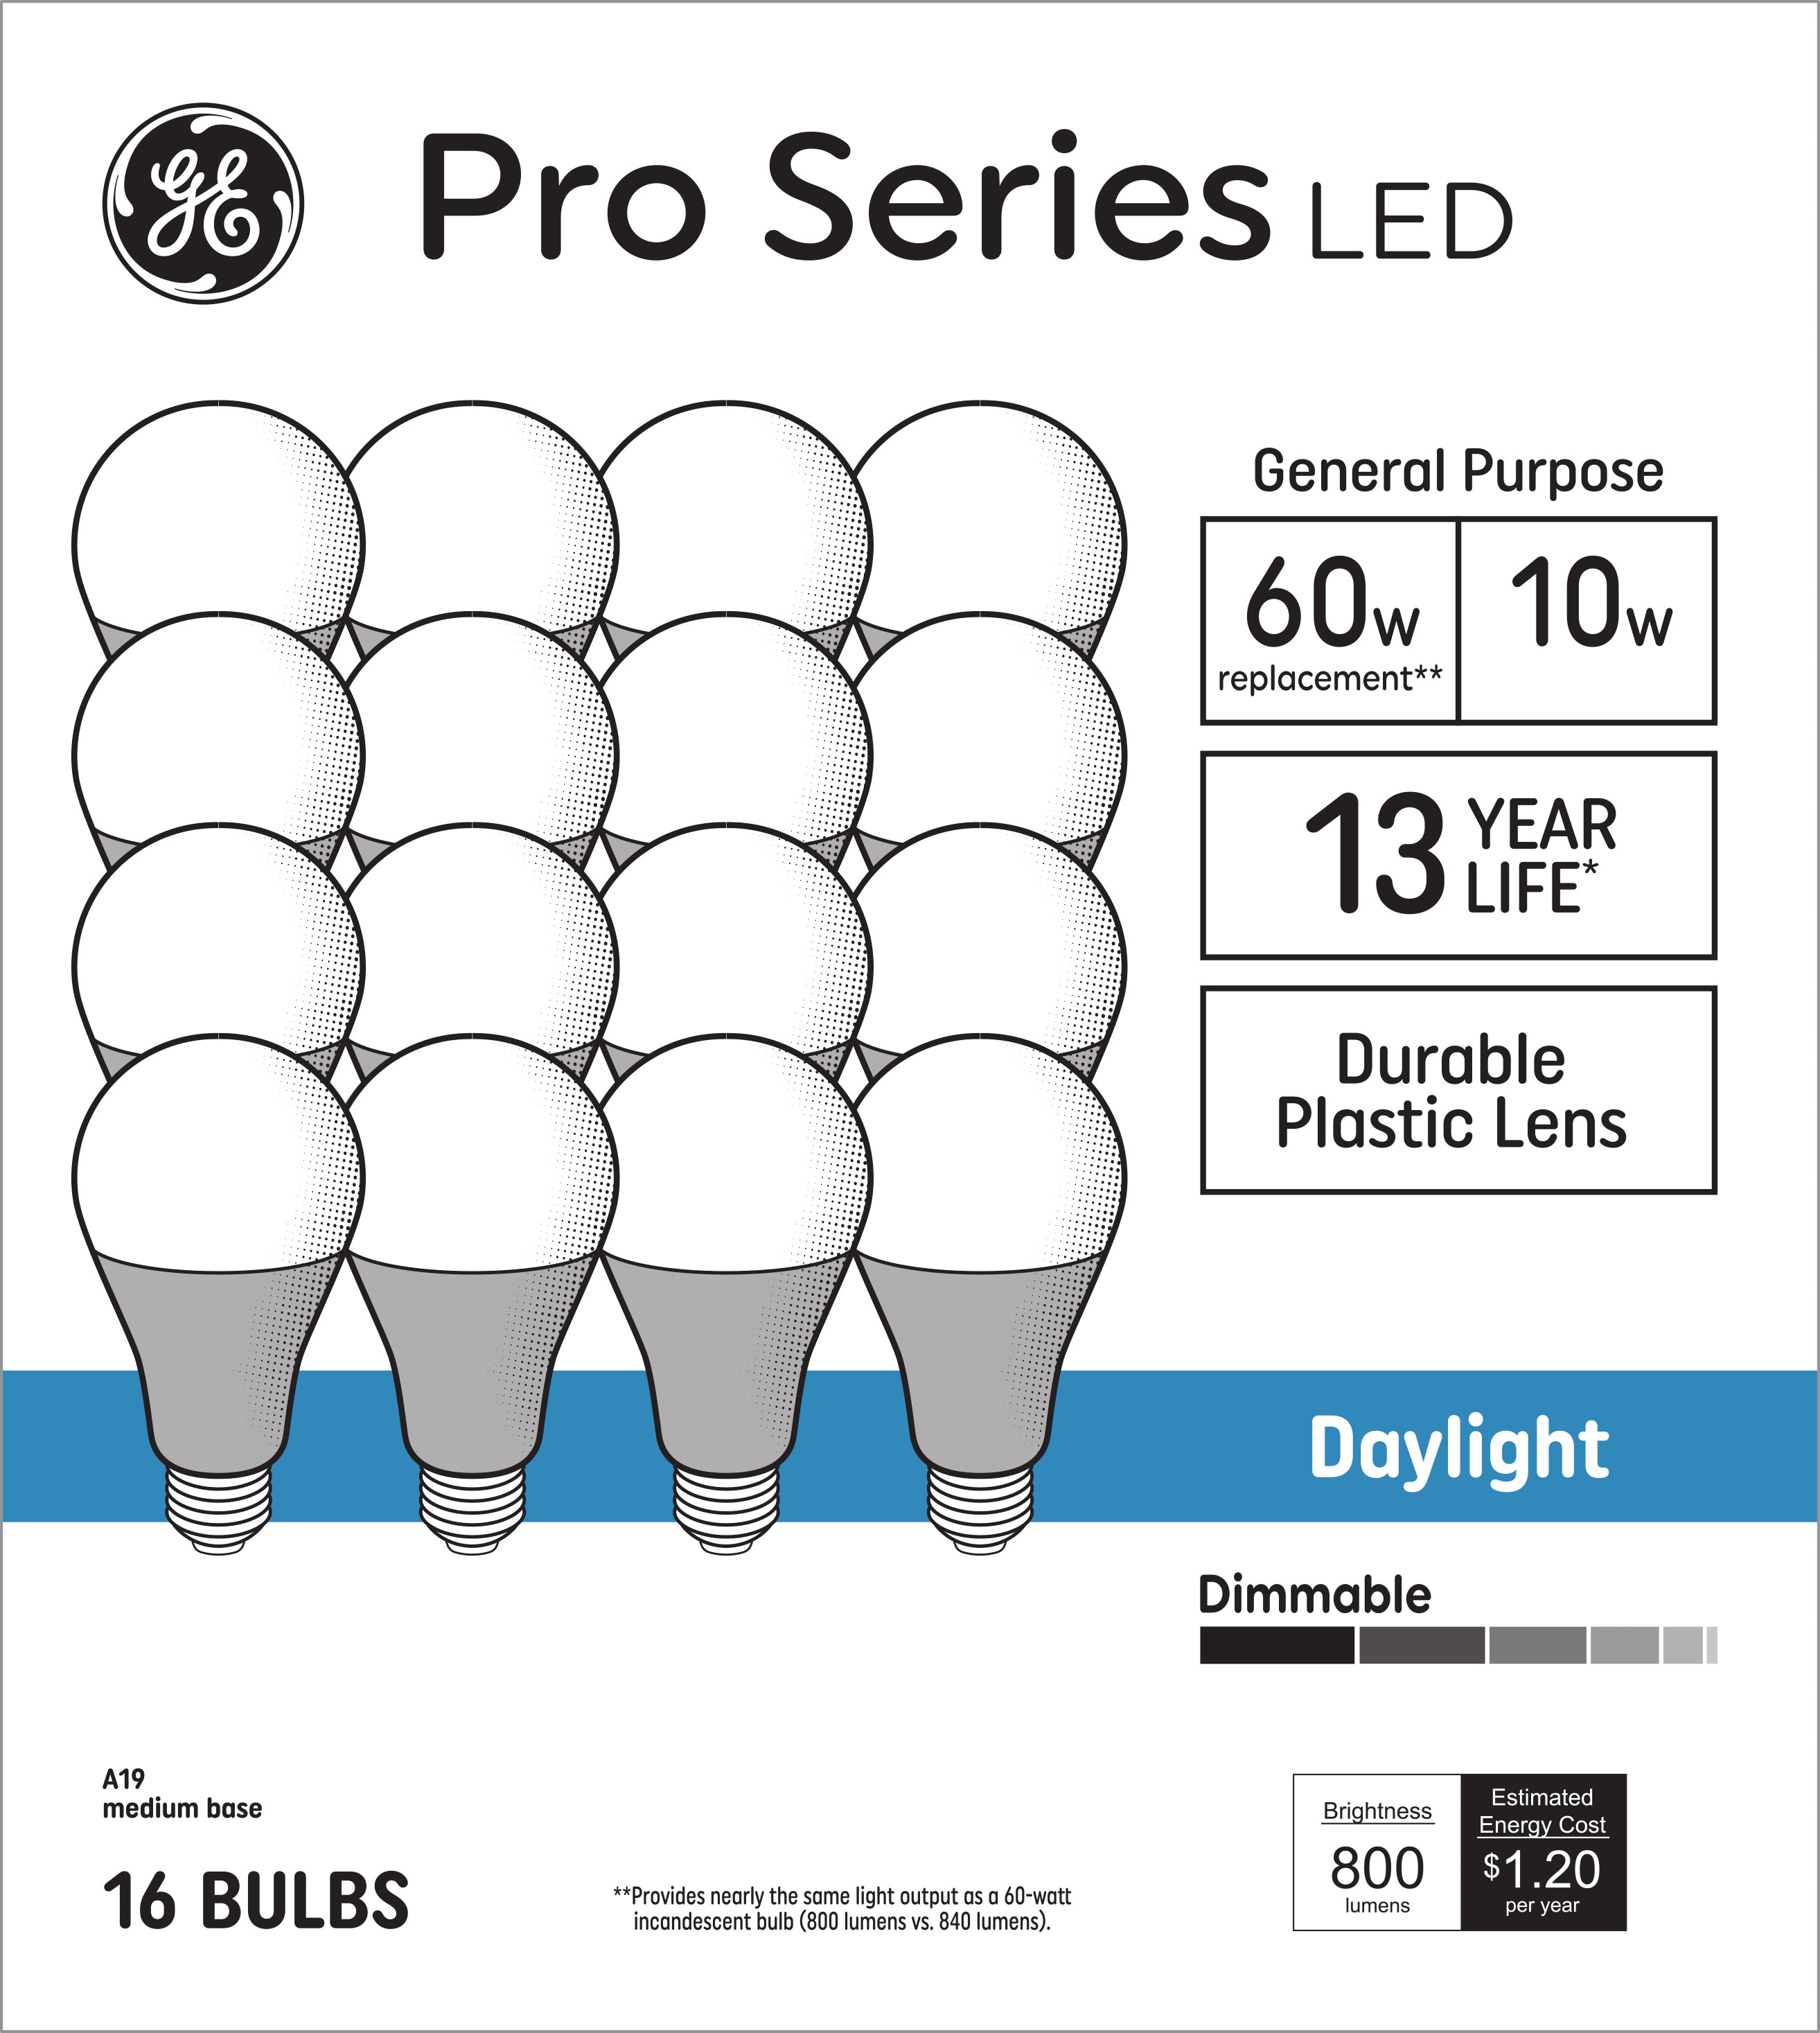  Philips LED GU10 Dimmable Bulb 3 Pack 4.5W Replace 50W,  Daylight (5000K) : Tools & Home Improvement